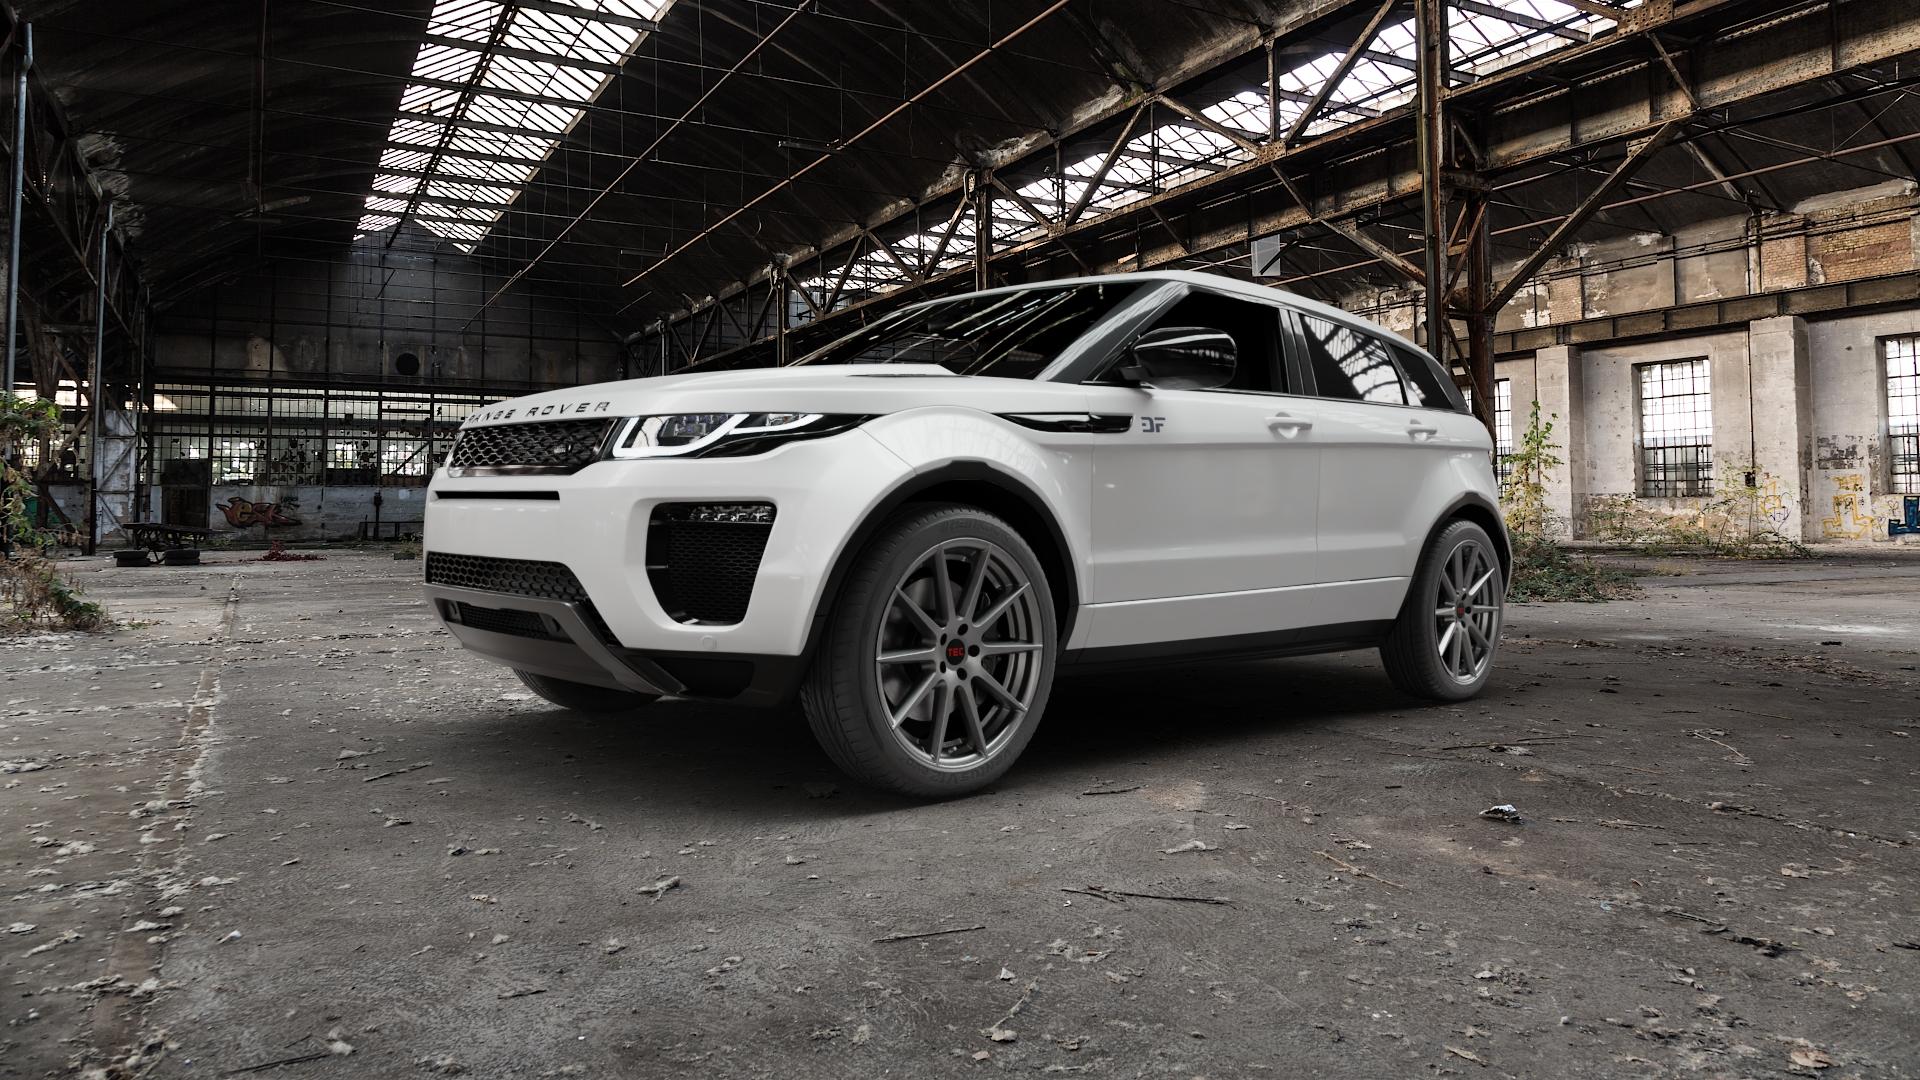 Land Rover Range Rover Evoque Type LV 2,0l Si4 4WD 177kW (241 hp) Wheels  and Tyre Packages